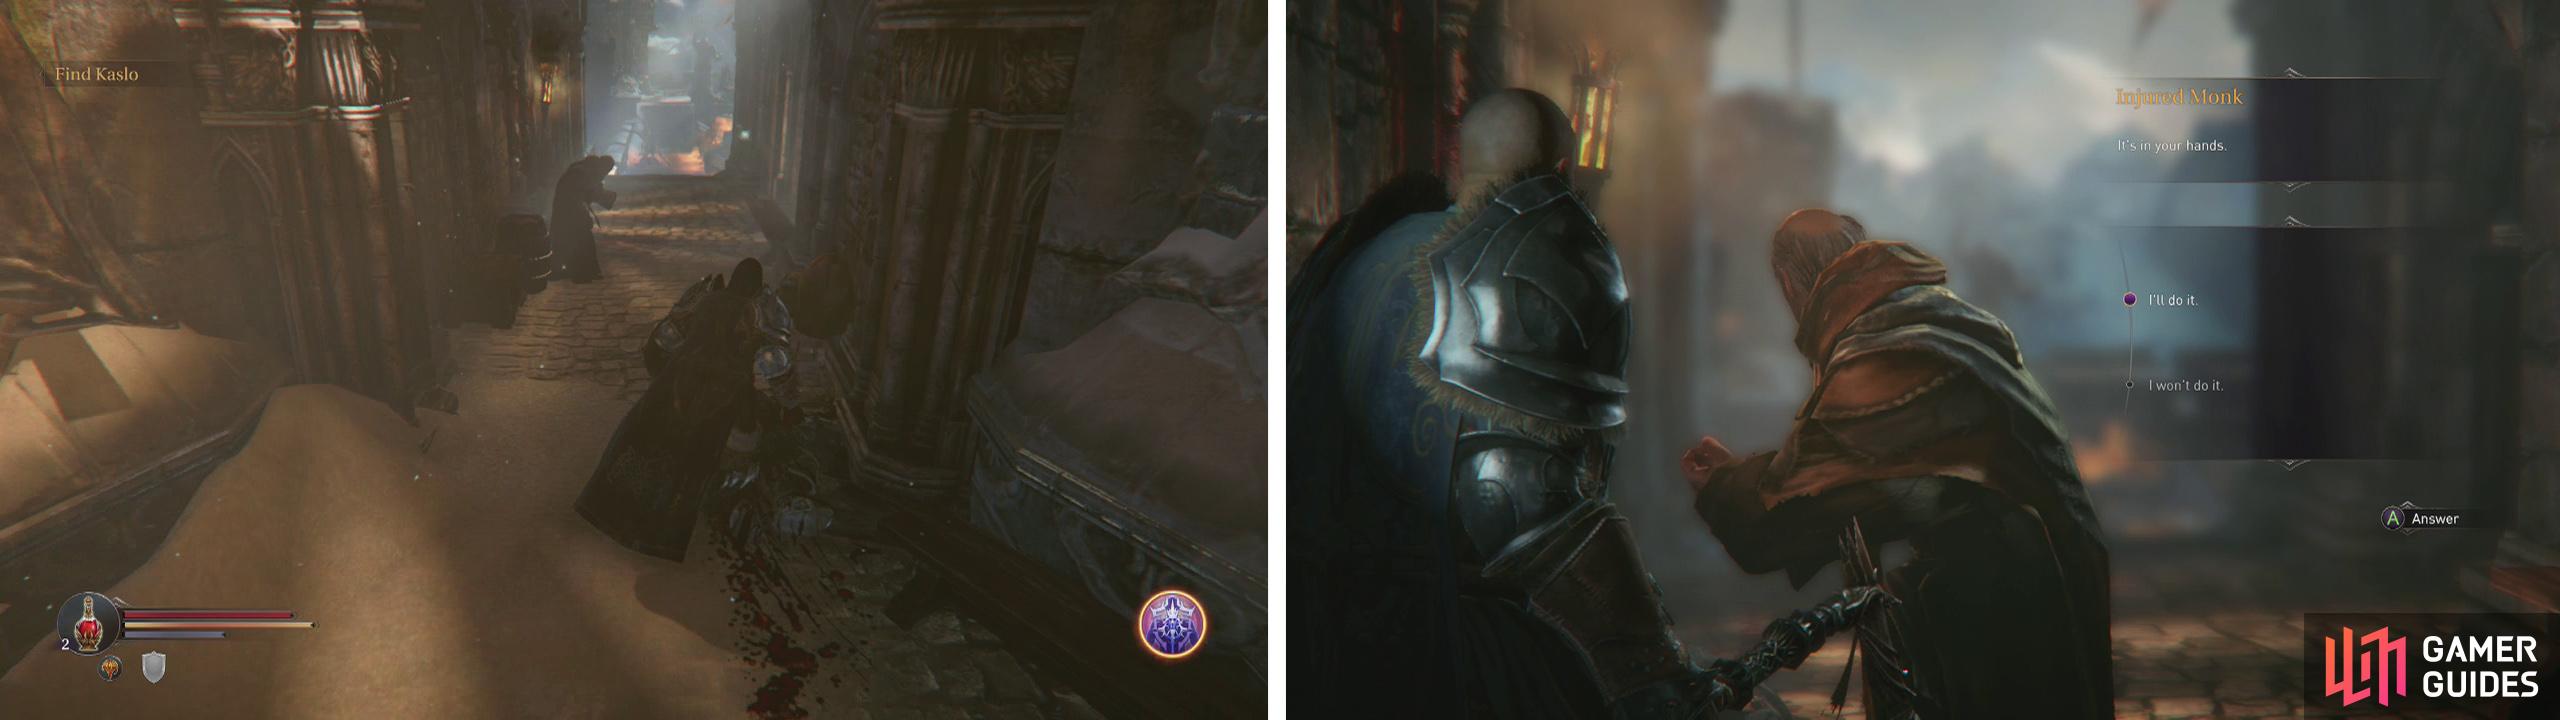 After exiting the gate speak to the monk (left). During the conversation (right) cut off his hand and give him a potion.